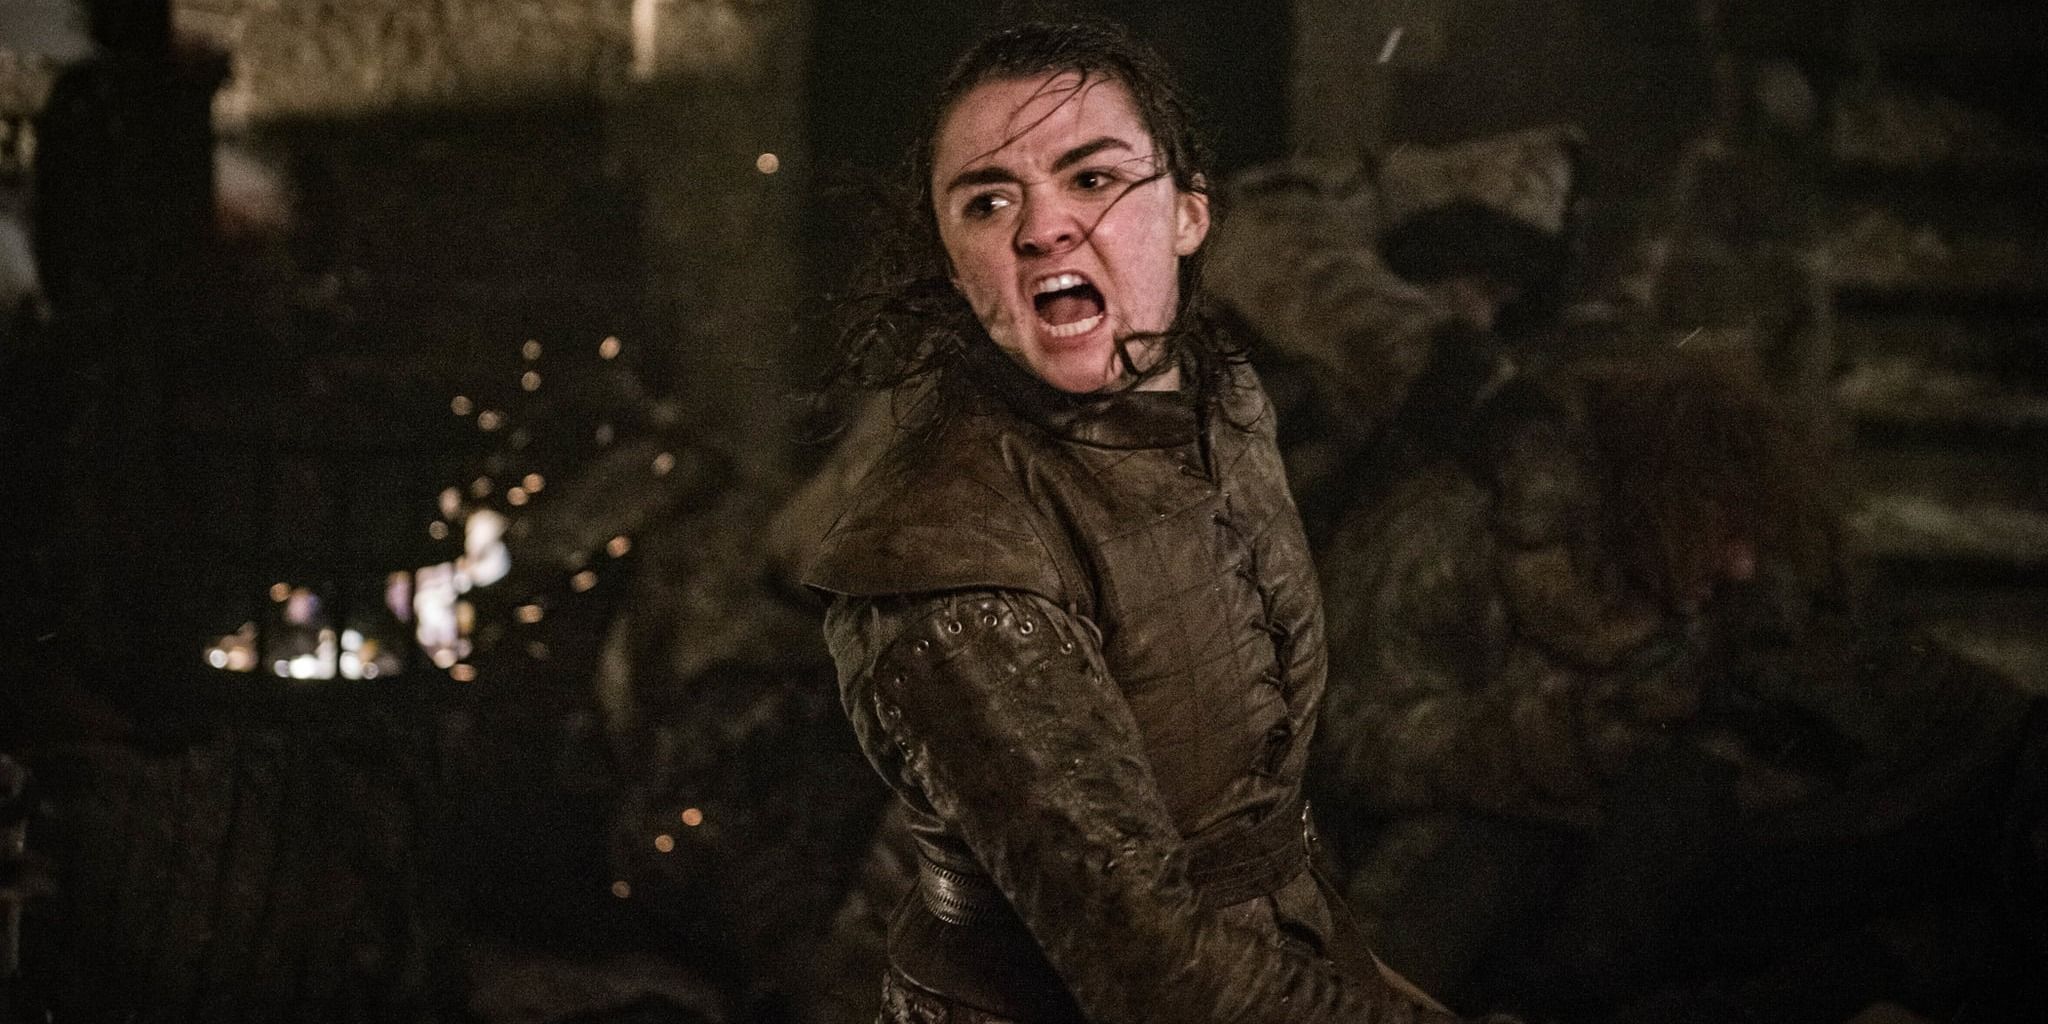 Arya Stark fights in the Battle of Winterfell in Game of Thrones